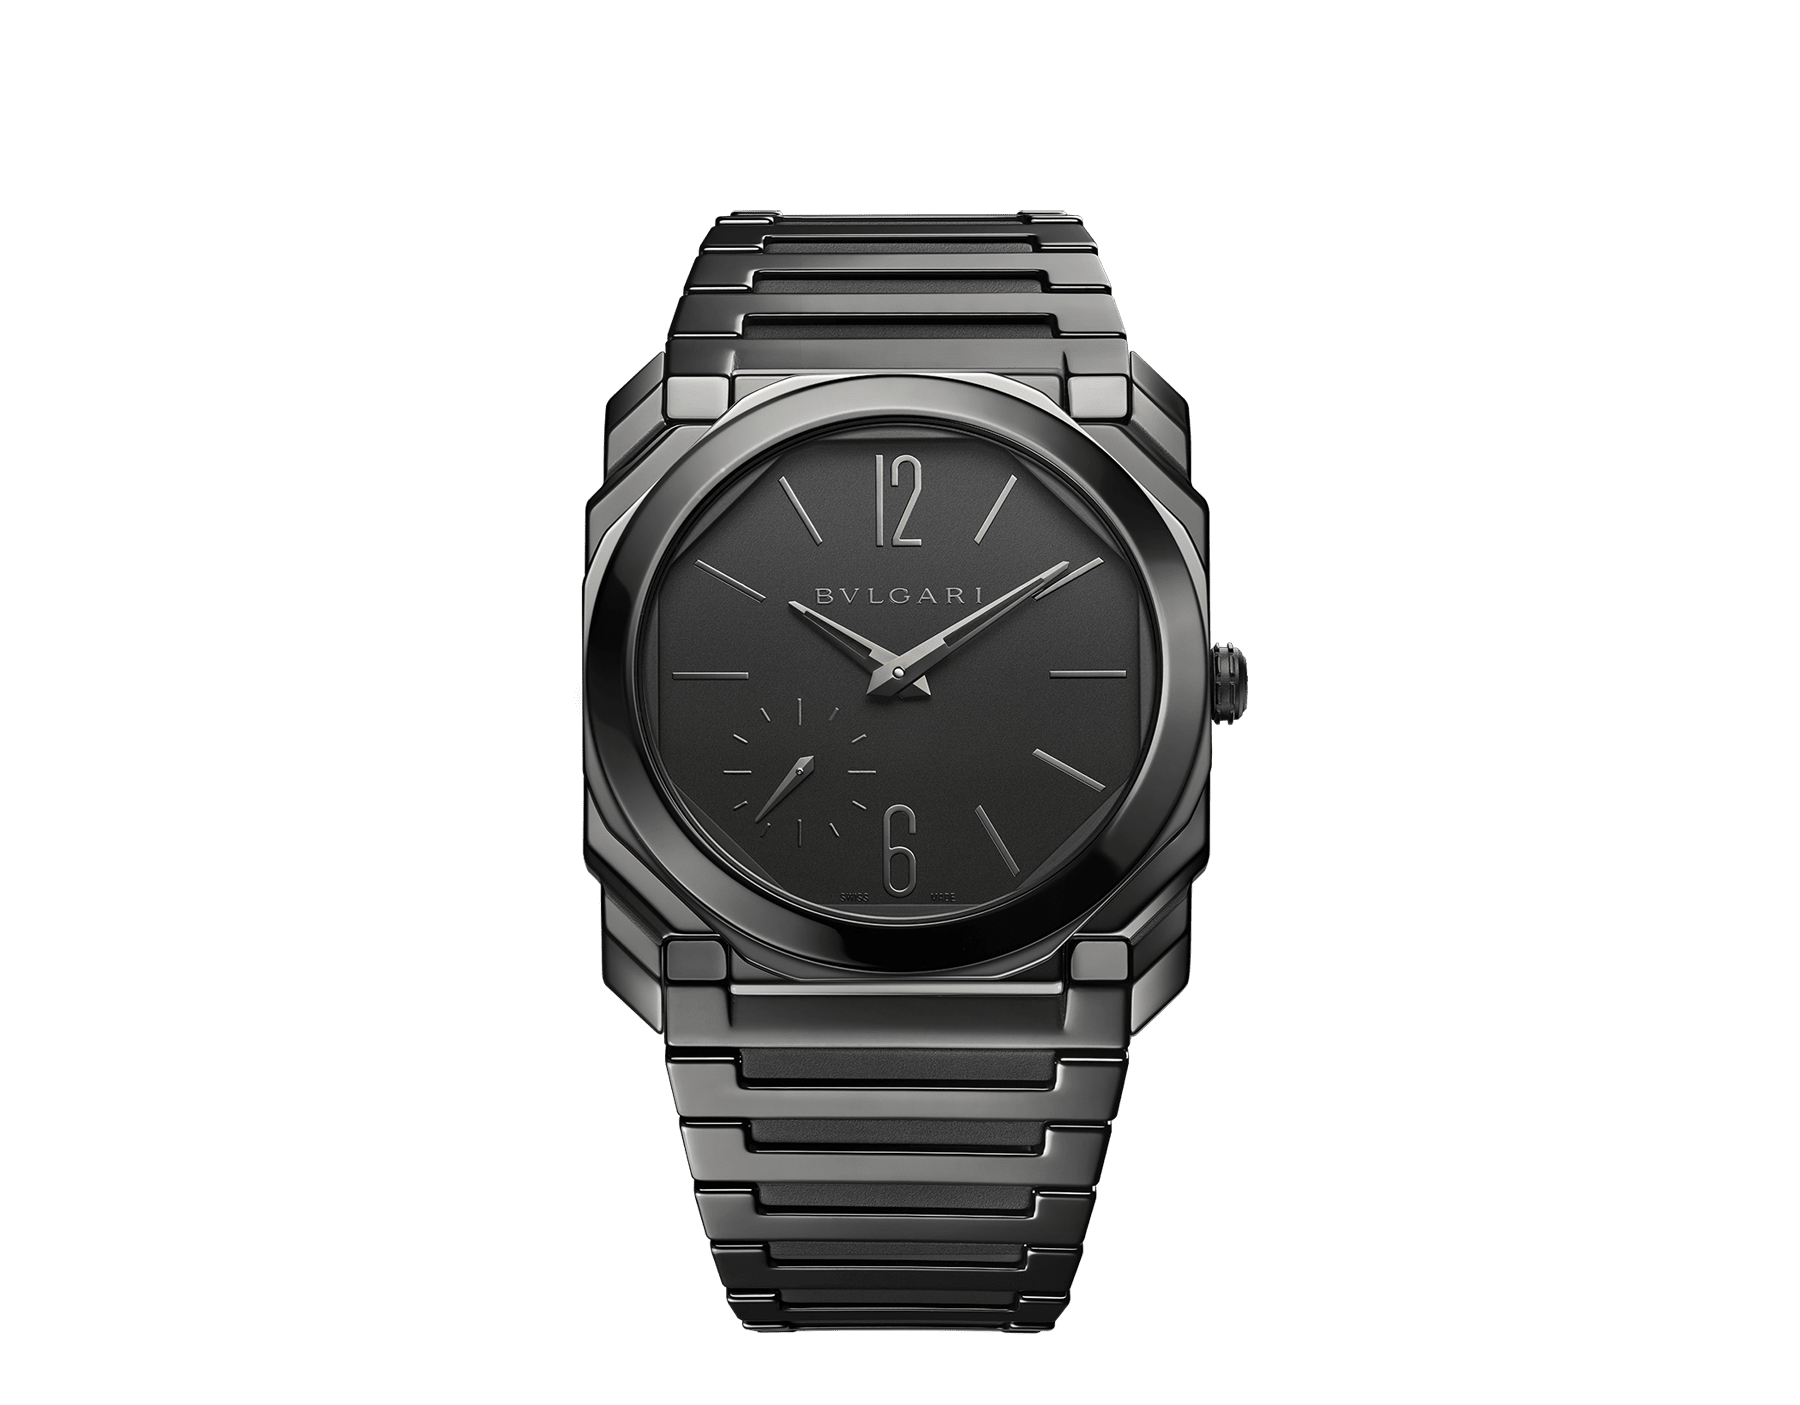 Octo Finissimo watch in sandblasted polished black ceramic with extra-thin mechanical manufacture movement, automatic winding, platinum microrotor, small seconds, transparent case back and sandblasted black ceramic dial. Water-resistant up to 30 meters 103368 image 1